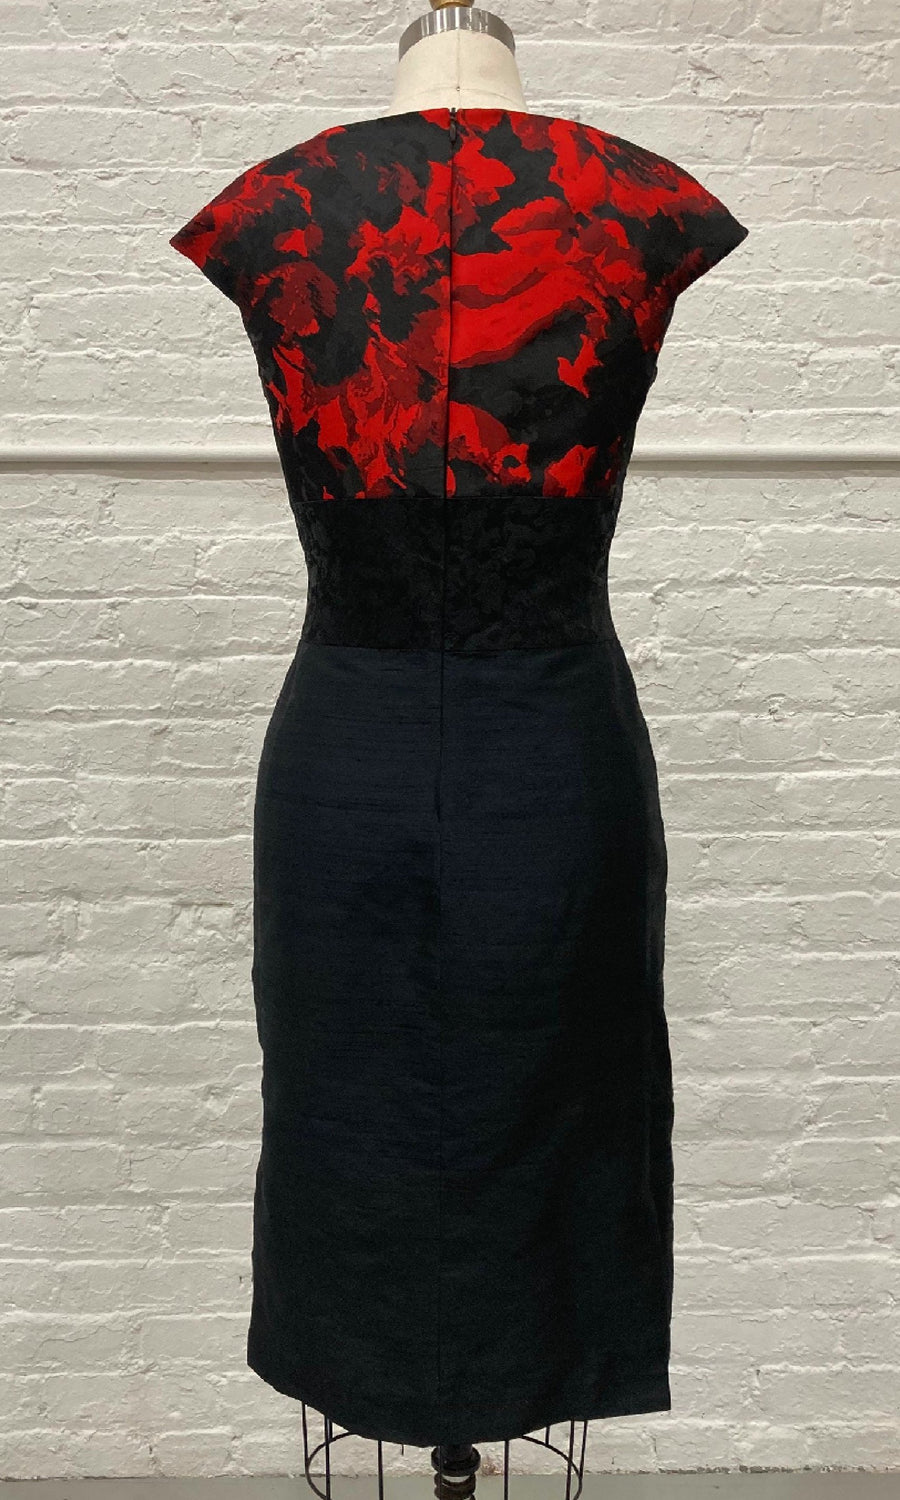 Red & Black Mixed Media Jackie Dress, size Small